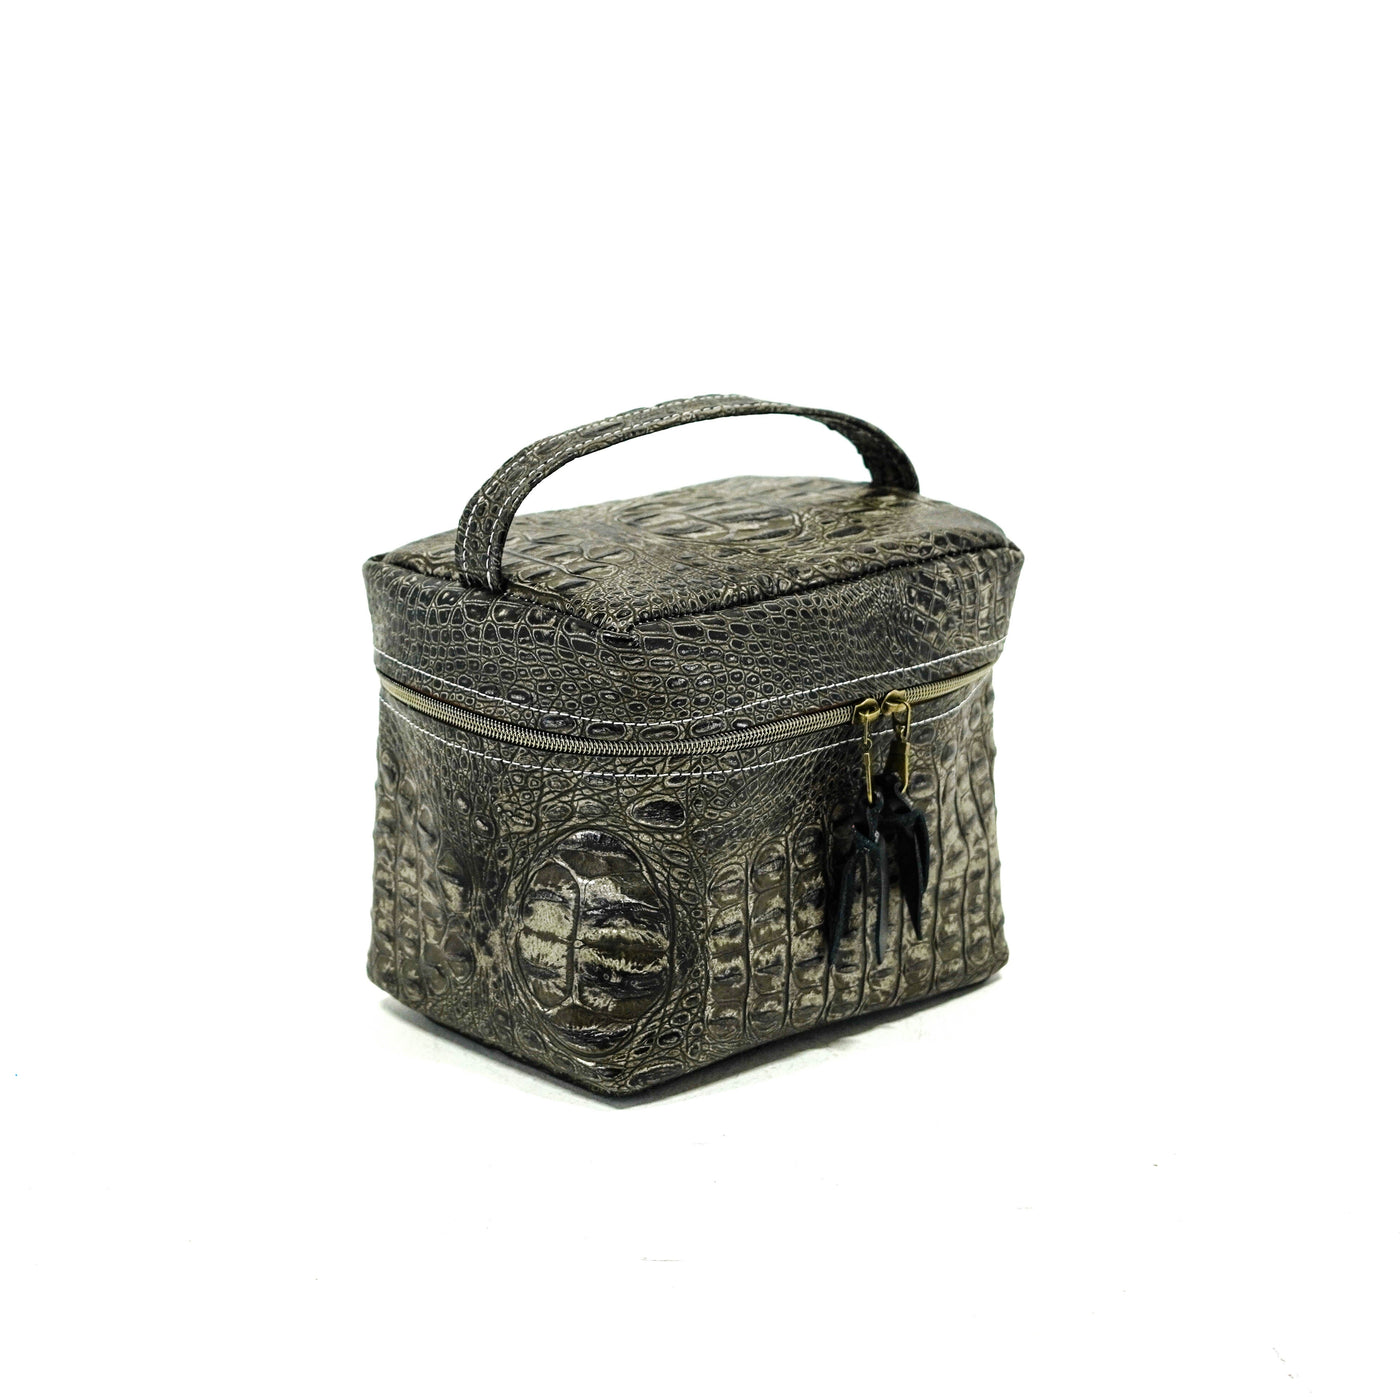 Caboose - All Embossed w/ Smoke Show Croc-Caboose-Western-Cowhide-Bags-Handmade-Products-Gifts-Dancing Cactus Designs